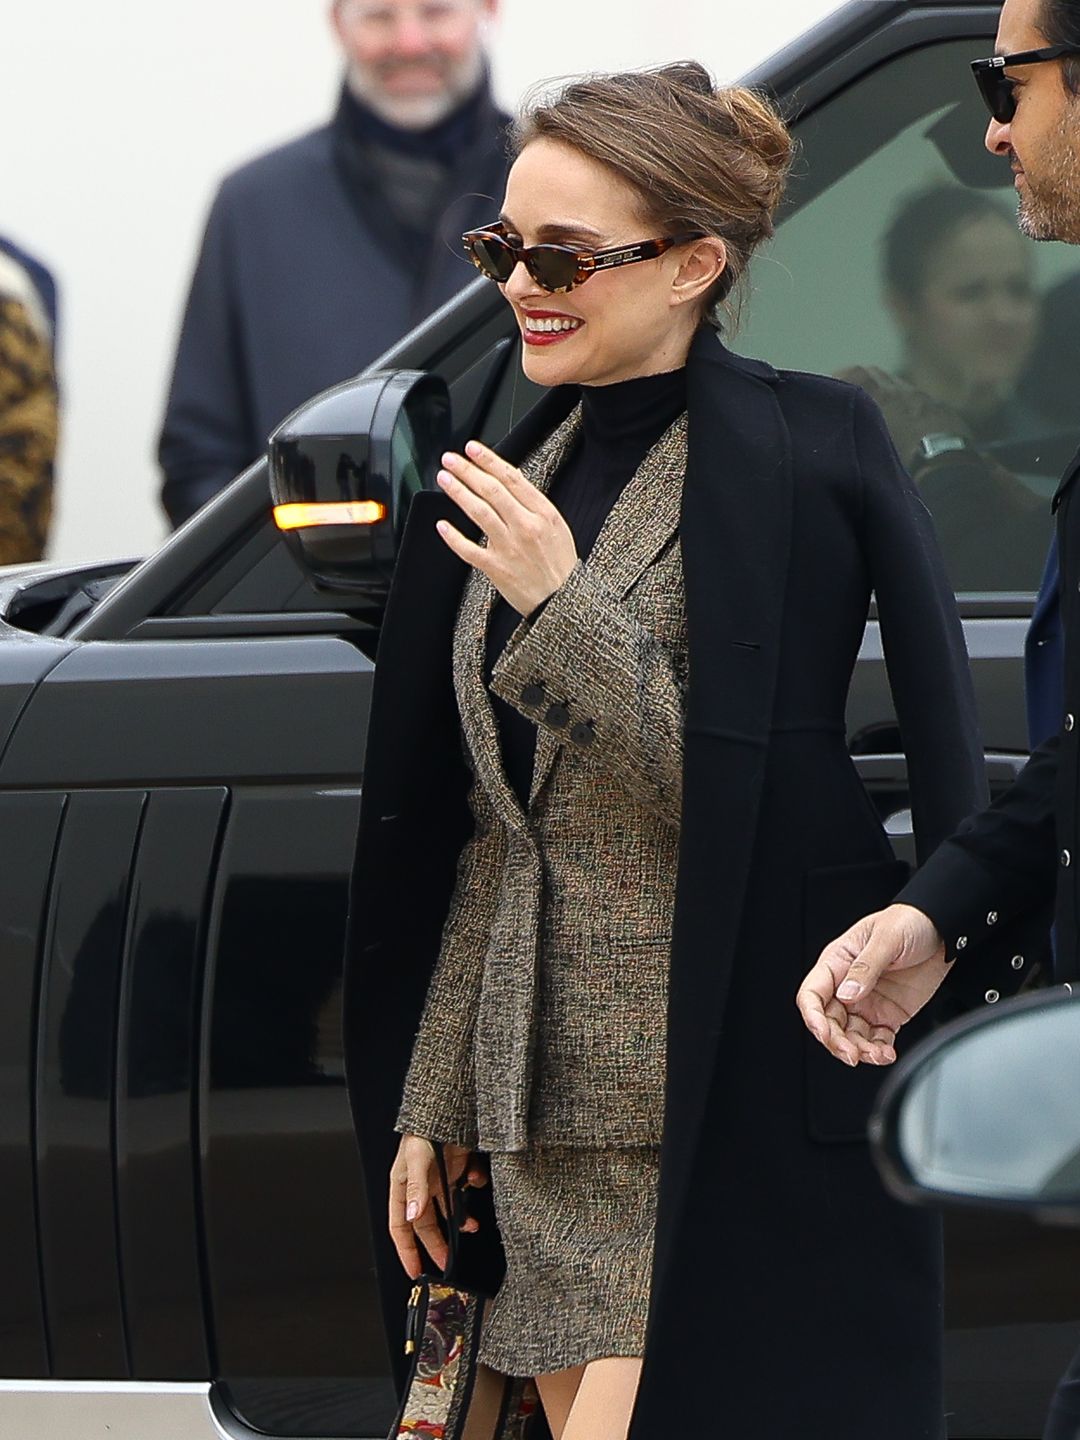 Actress Natalie Portman attends the Christian Dior in a tweed mini skirt and blazer, black coat and sunglasses